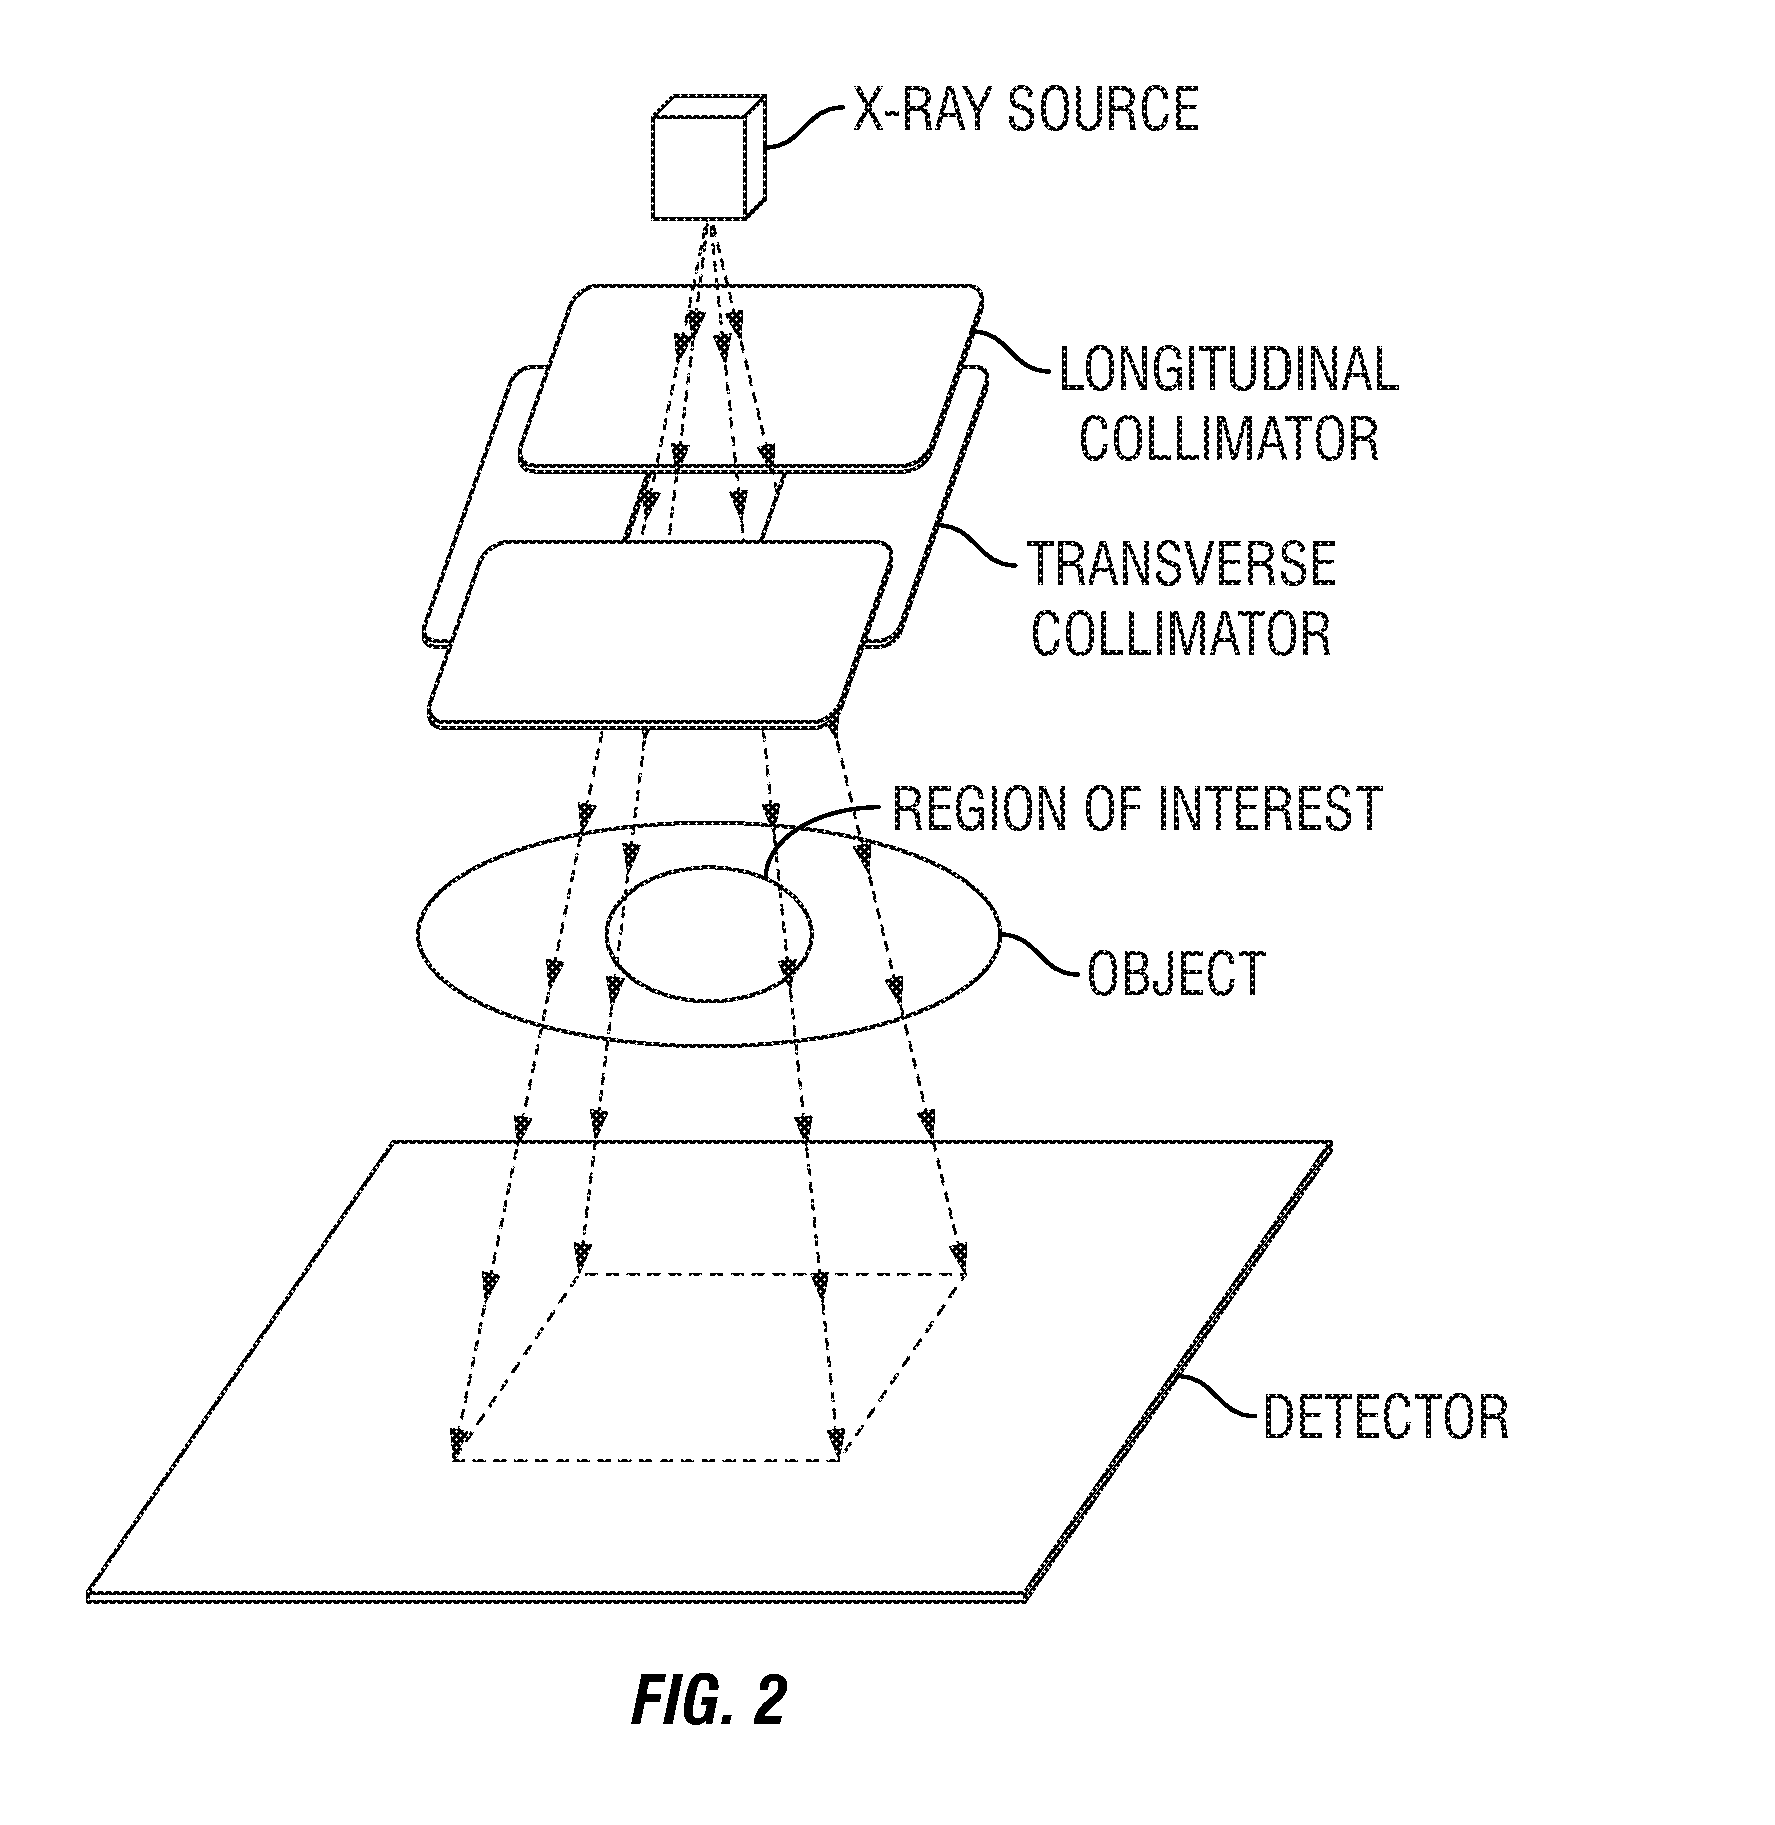 Intensity-modulated, cone-beam computed tomographic imaging system, methods, and apparatus